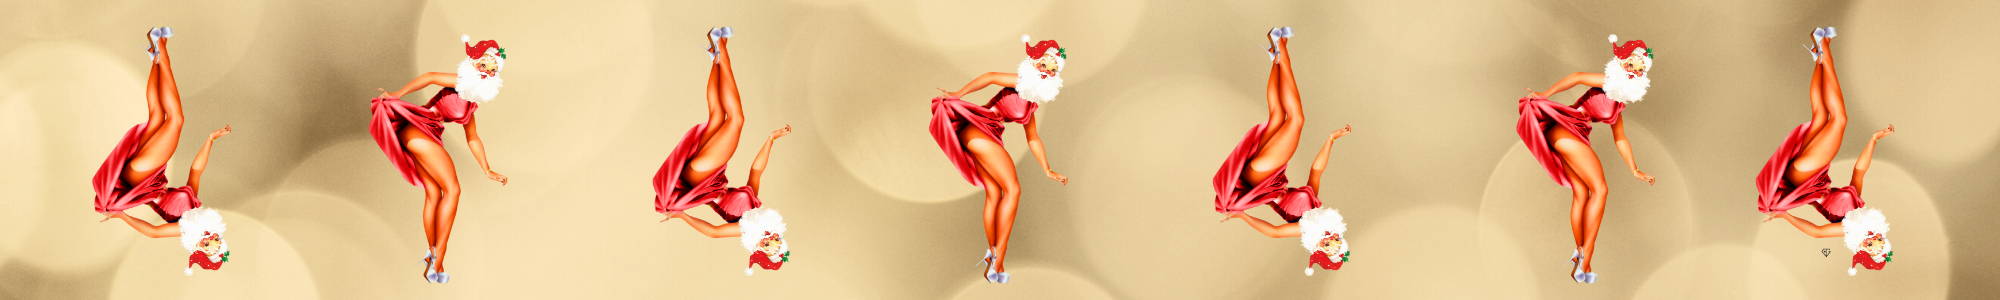 AlSeven alternating (right-side-up and upside-down) sexy Santas: short red dress, tan legs, and jolly white beard.